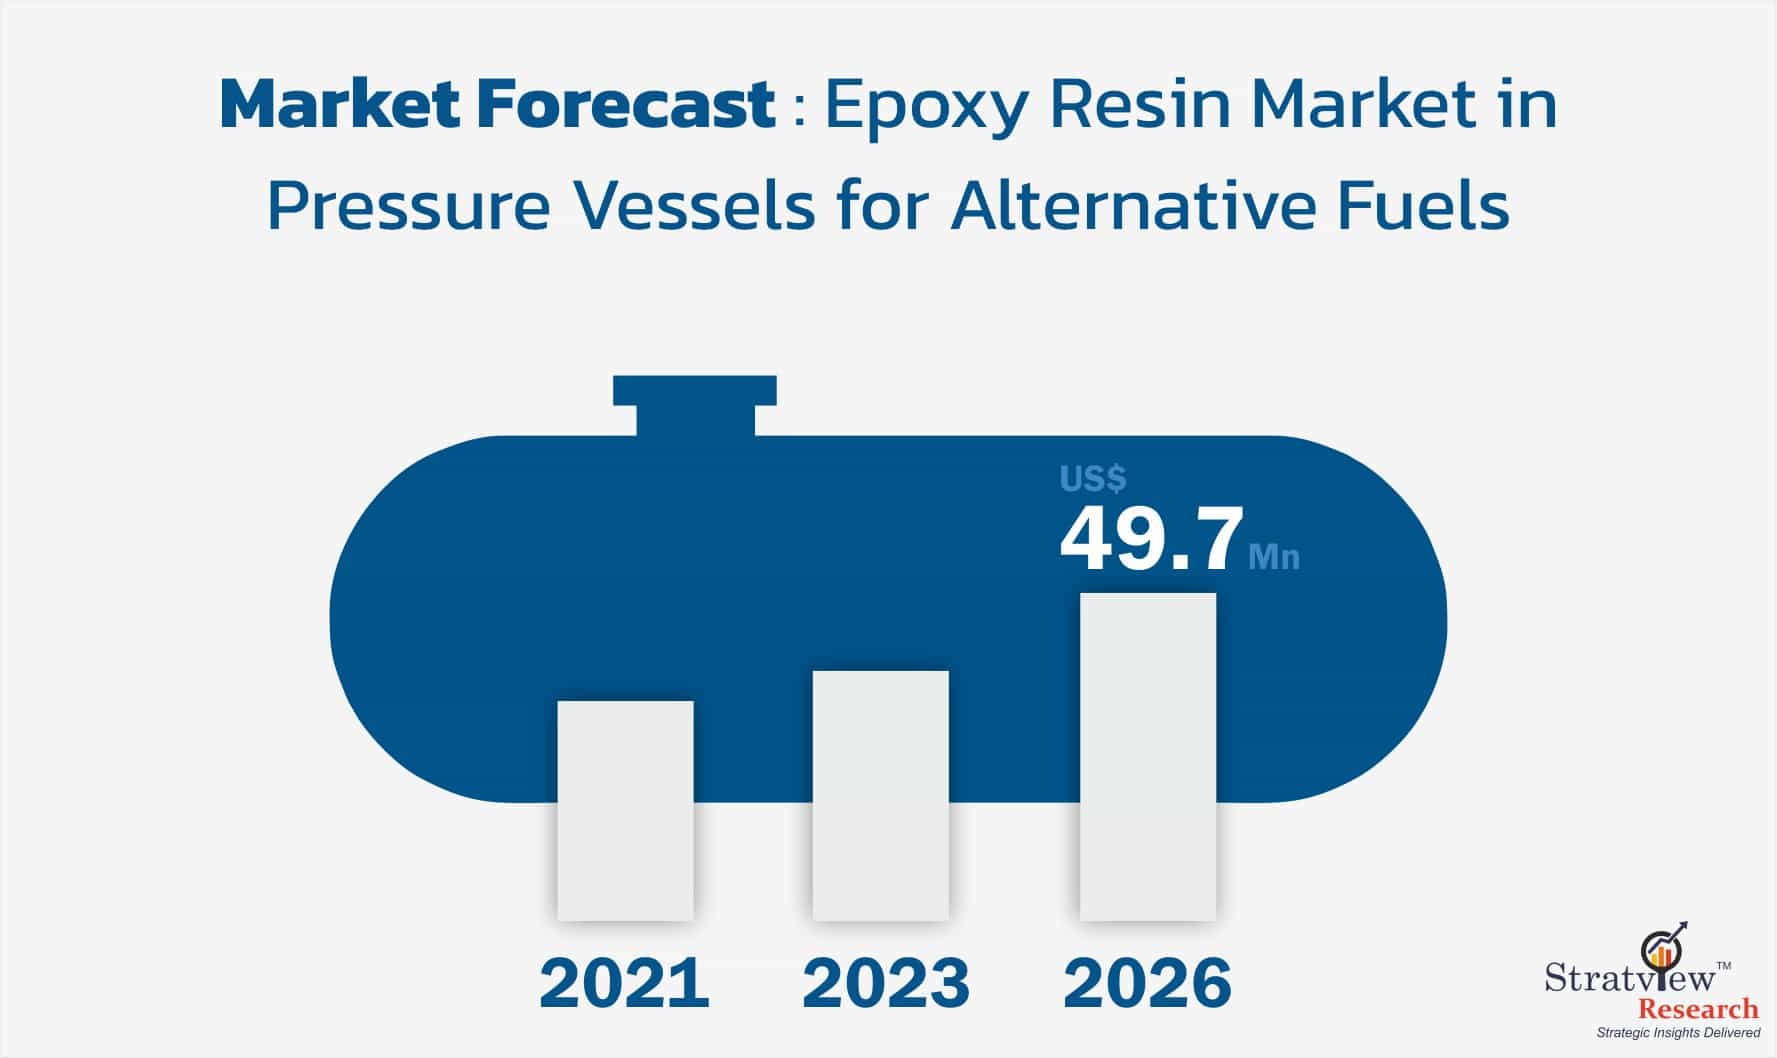 Epoxy-Resin-Market-in-Pressure-Vessels-for-Alternative-Fuels-Forecast